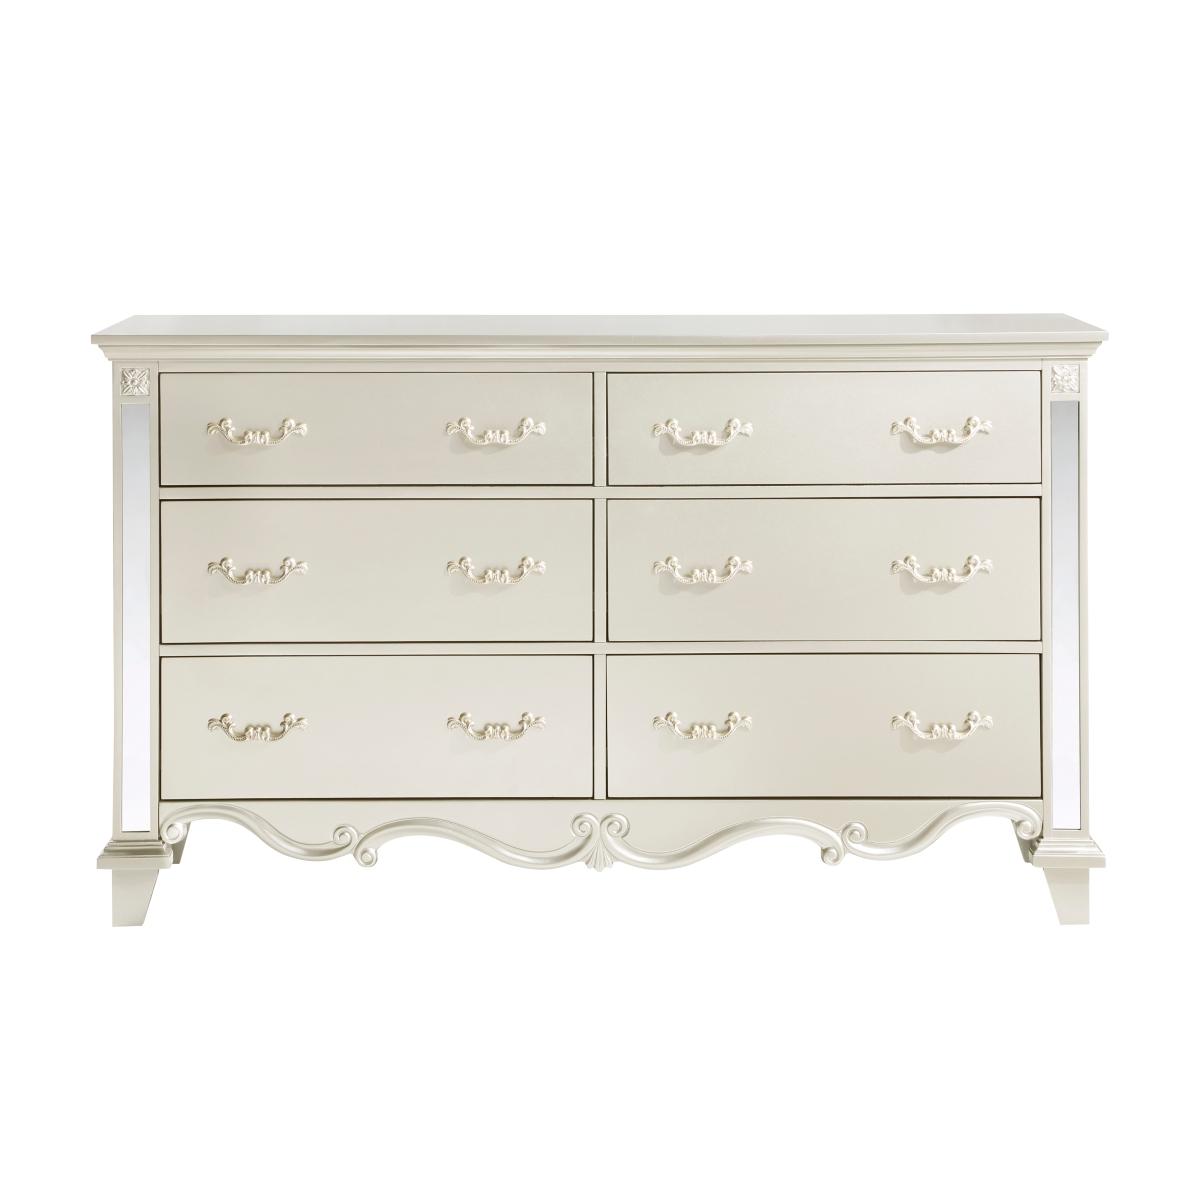 Traditional Dresser 1429-5 Ever 1429-5 in Champagne 